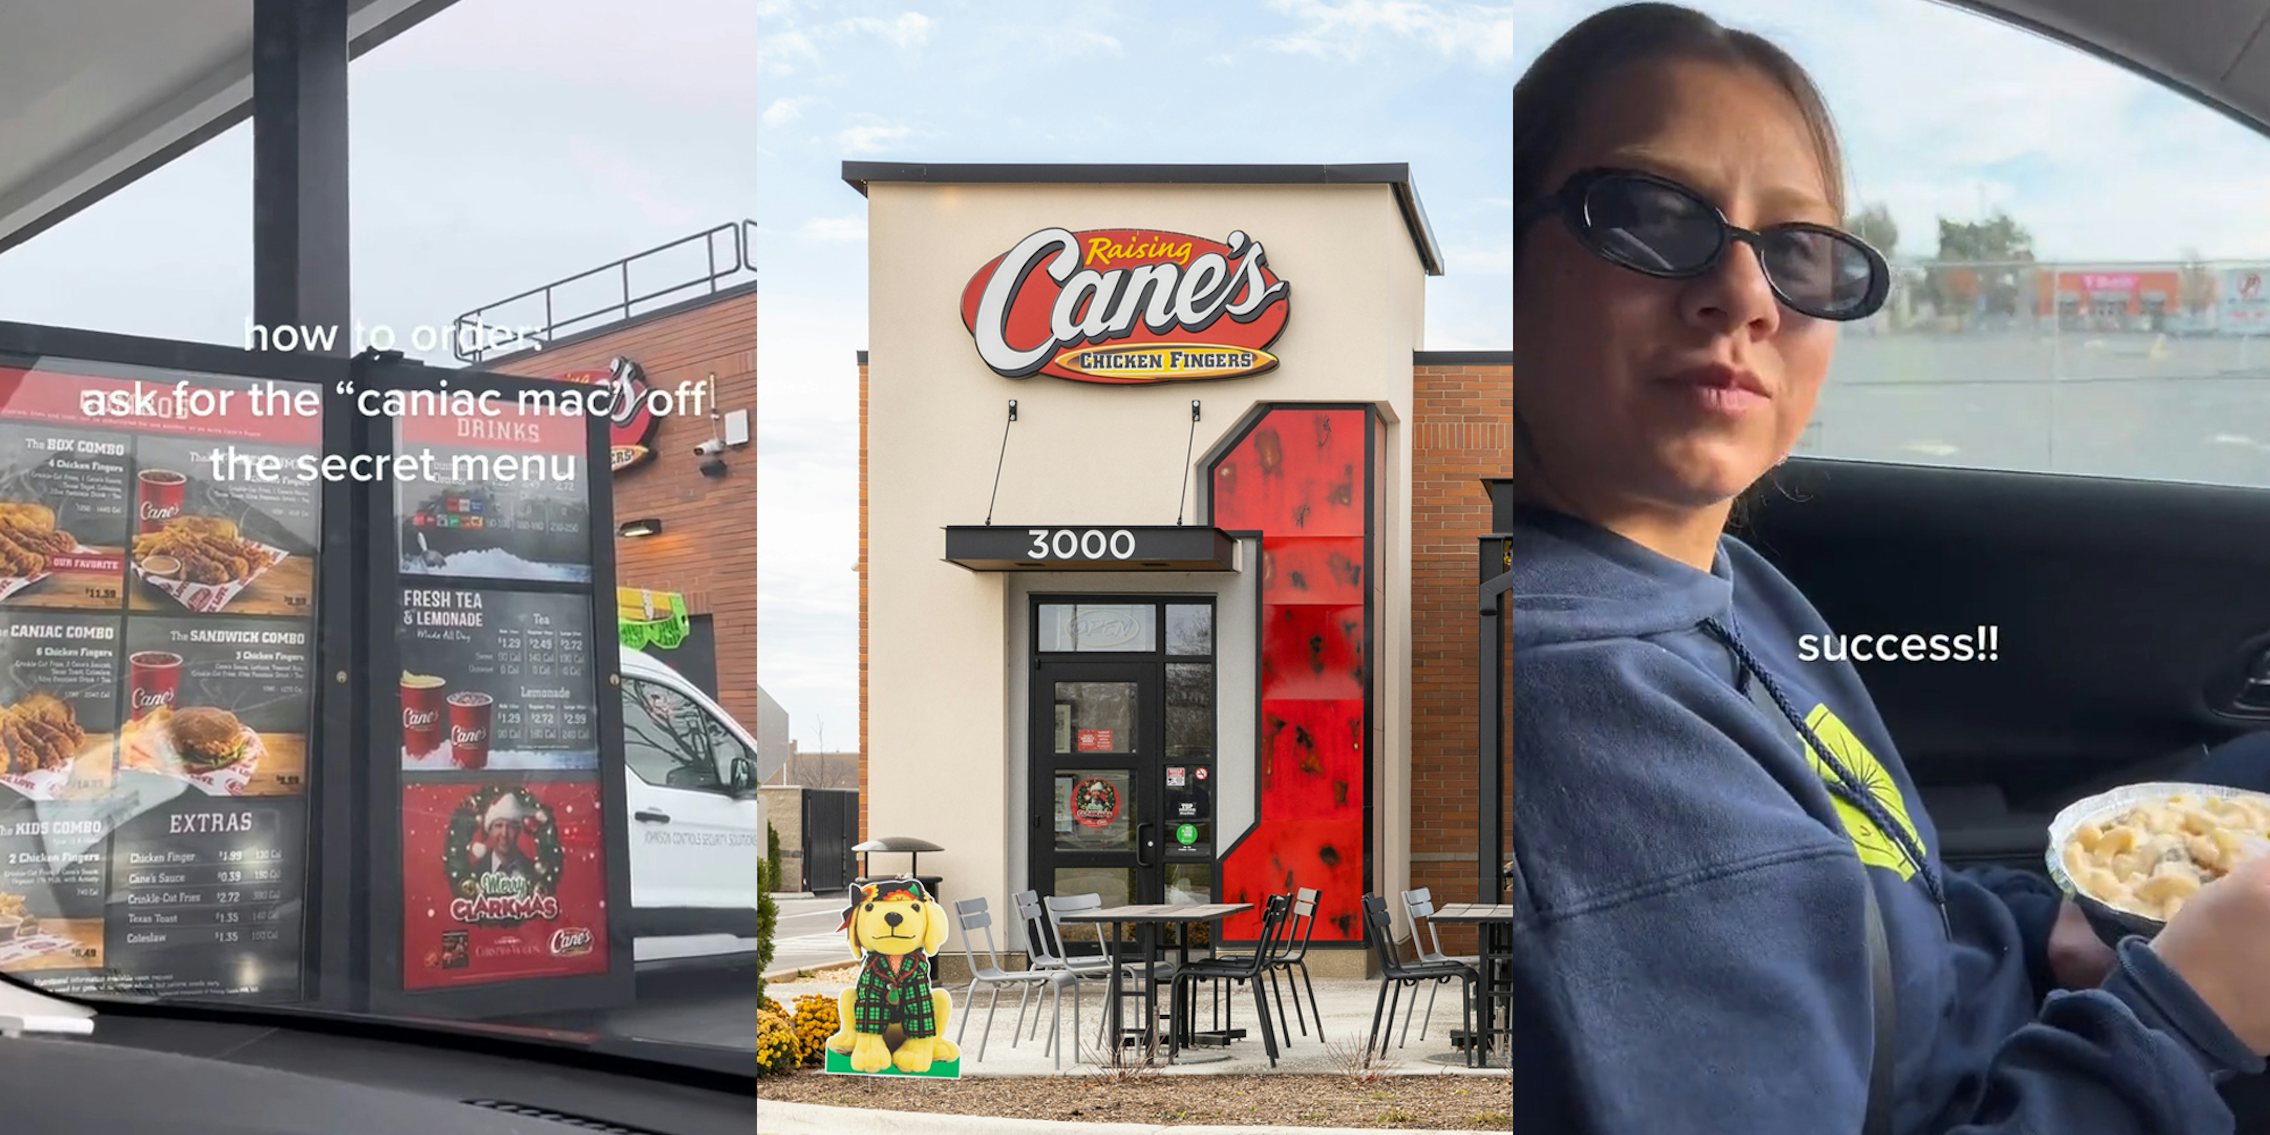 Canes drive thru menu with caption 'how to order ask for the 'caniac mac' off the secret menu' (l) Cane's sign on building (c) woman eating mac and cheese in car with caption 'success!!' (r)